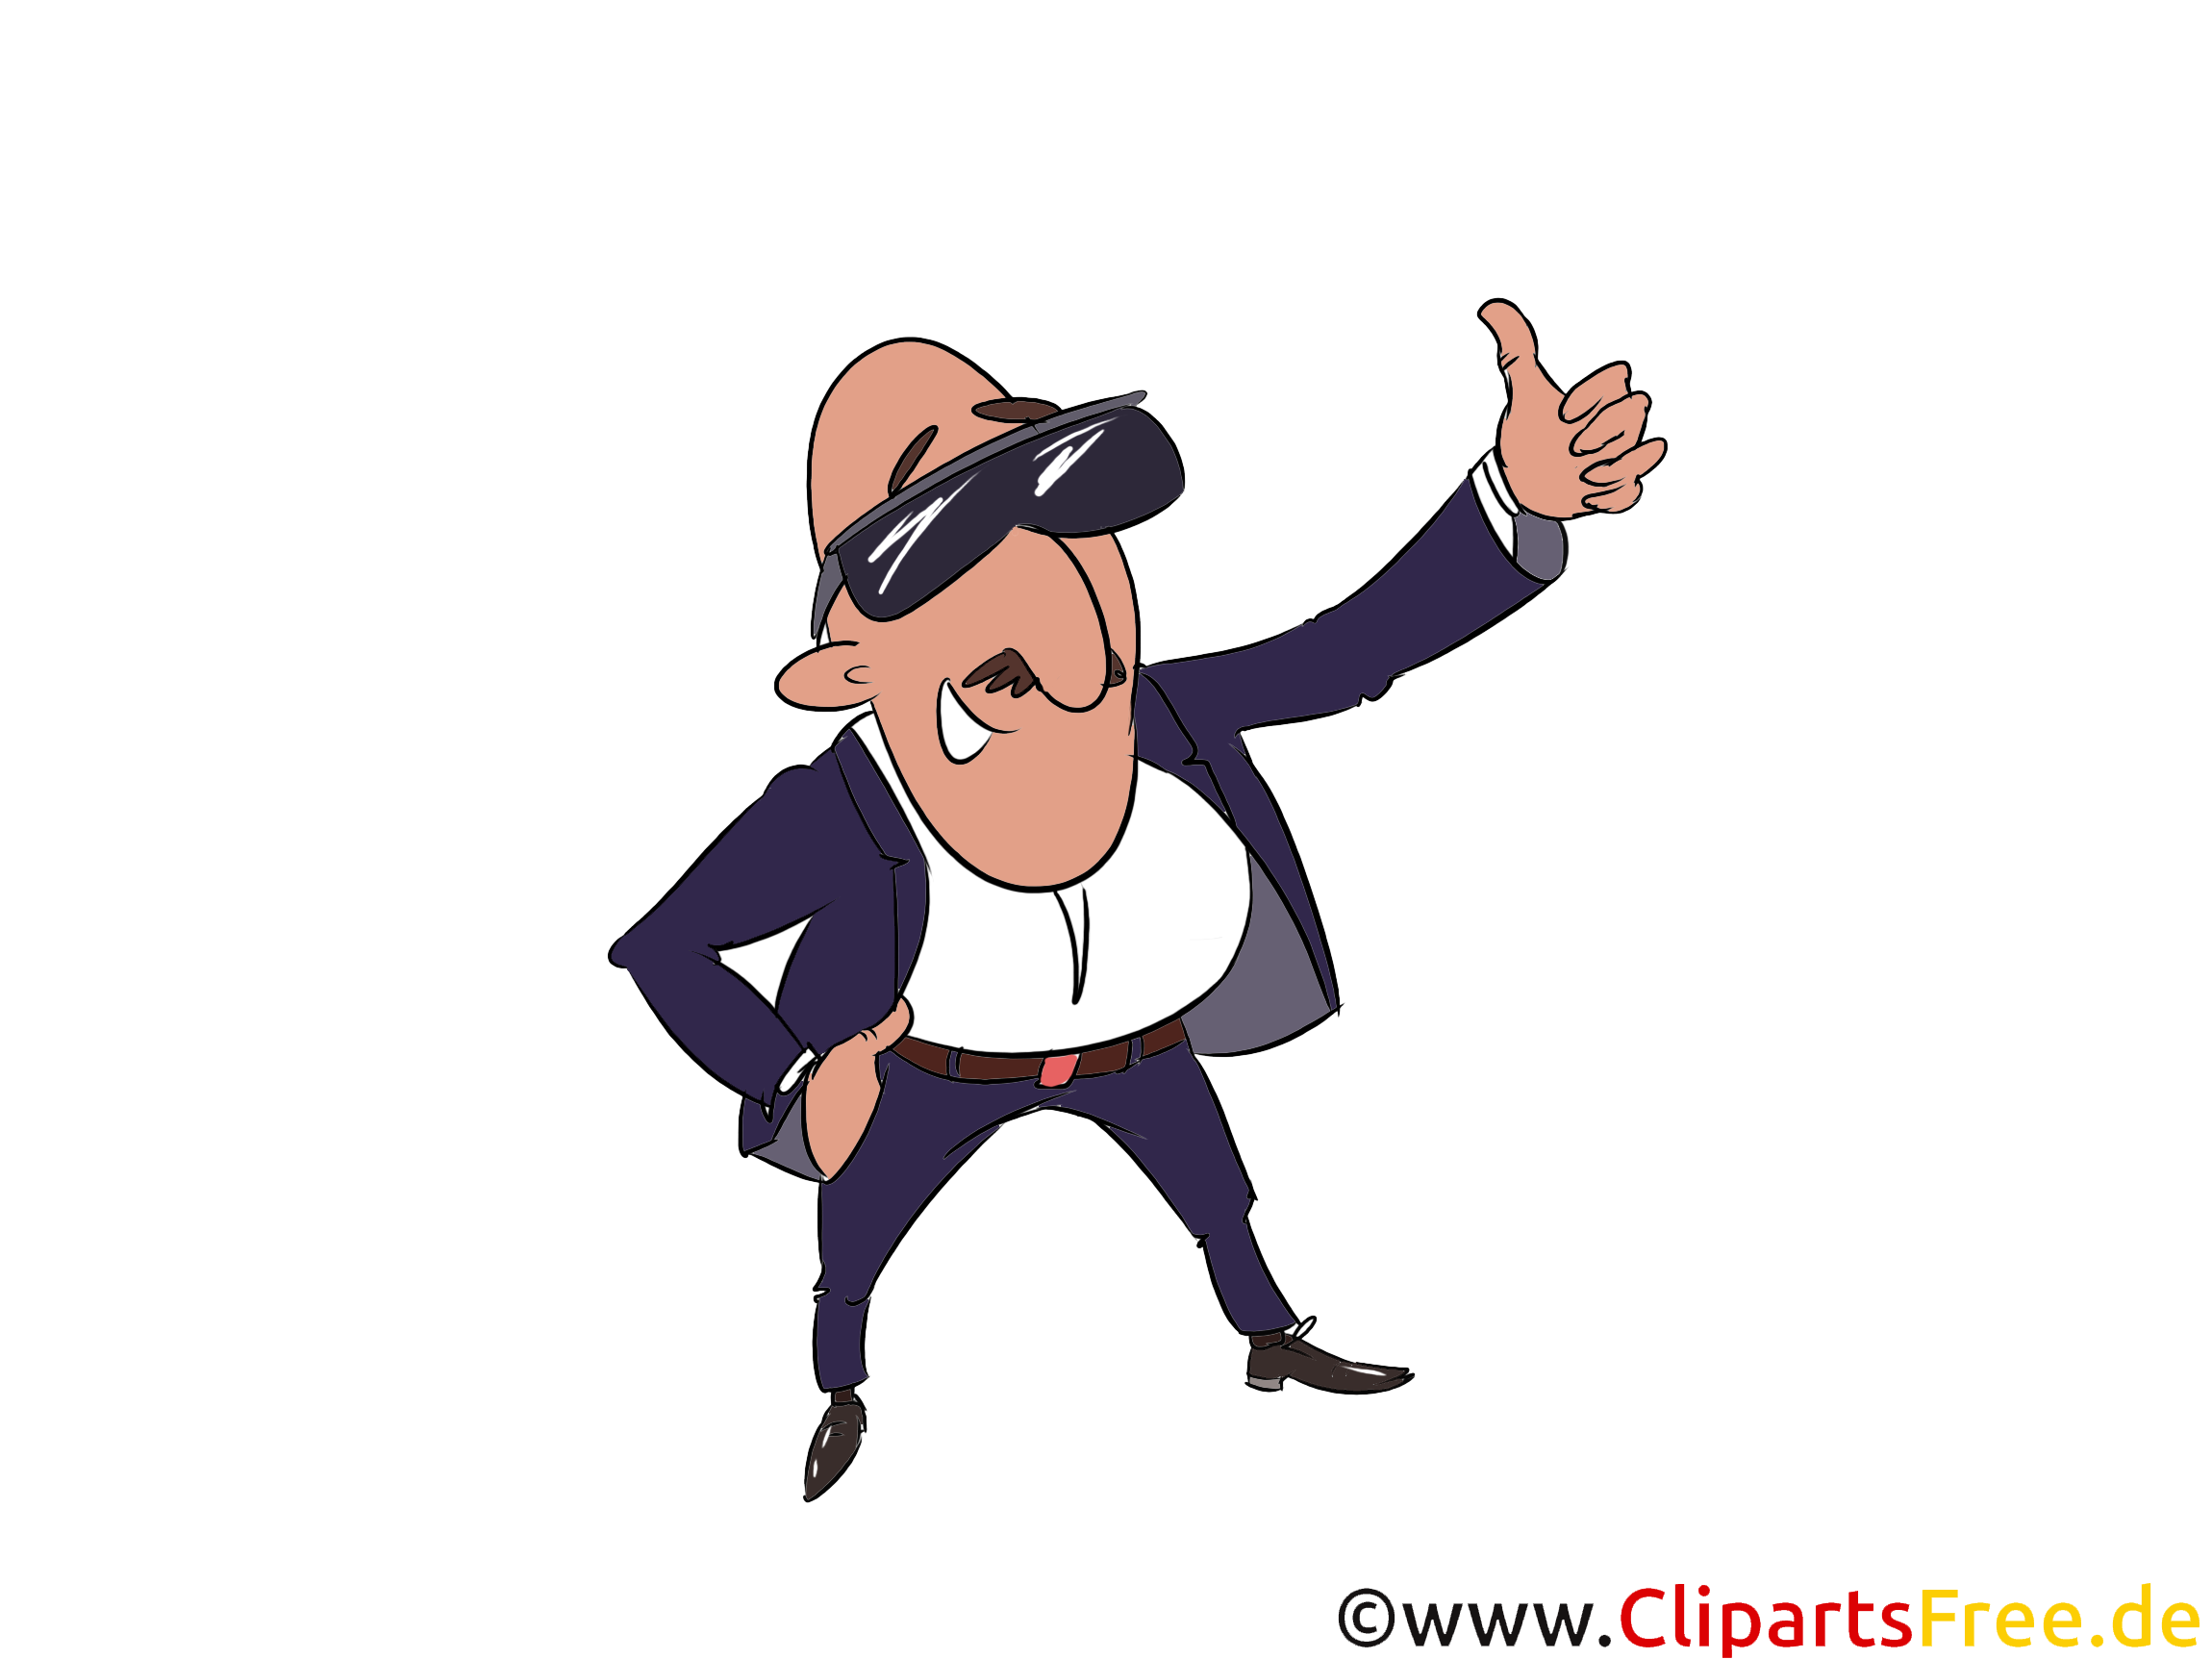 cool_clipart_20191206_1921076587.png